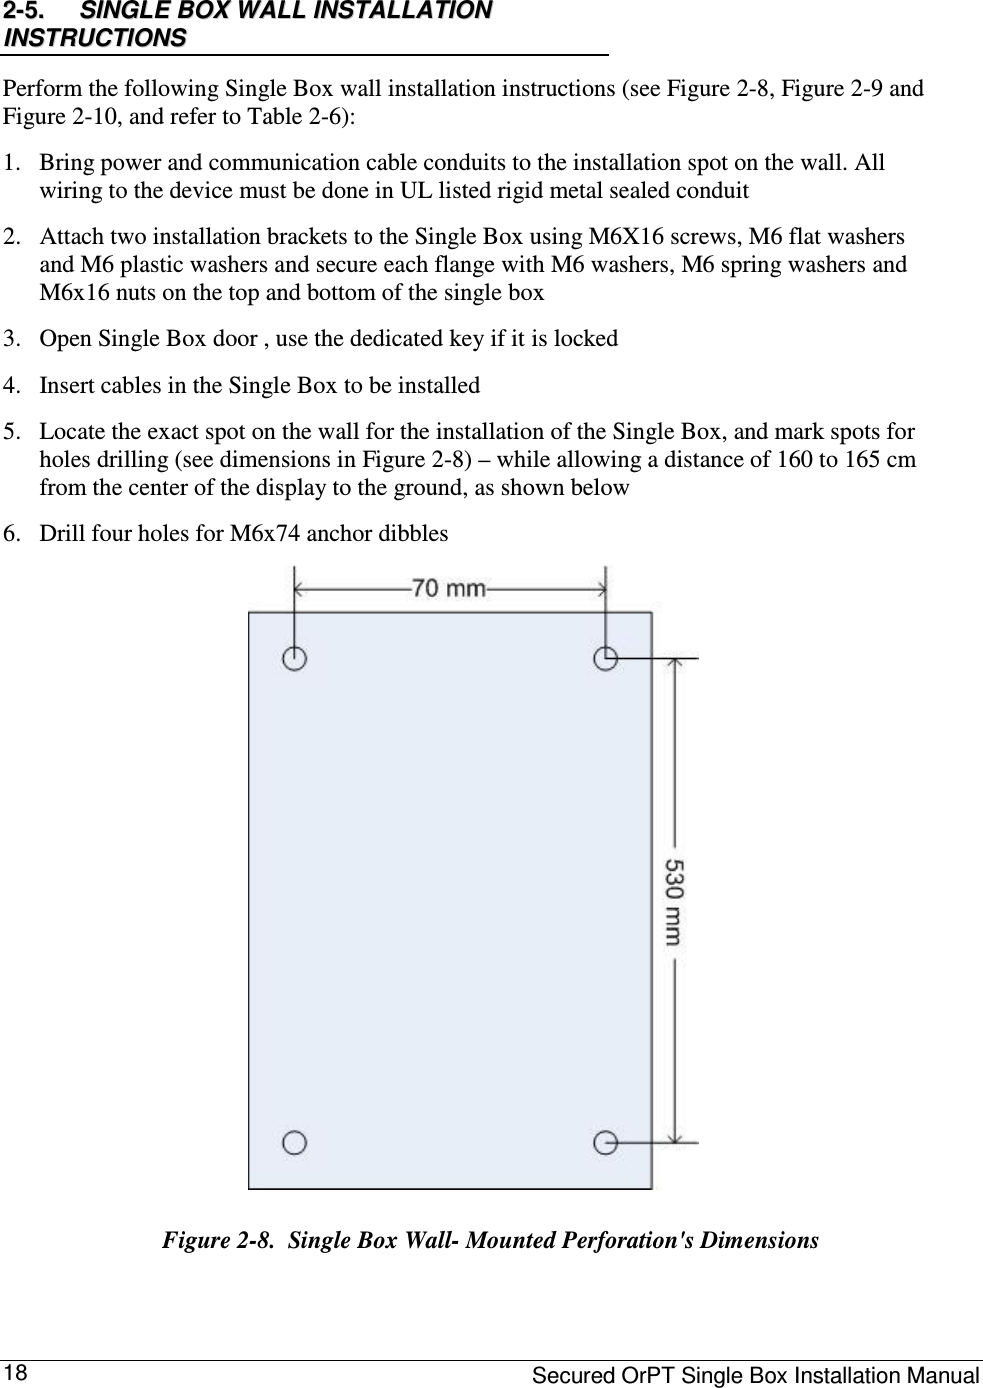     Secured OrPT Single Box Installation Manual 18 22--55..    SSIINNGGLLEE  BBOOXX  WWAALLLL  IINNSSTTAALLLLAATTIIOONN  IINNSSTTRRUUCCTTIIOONNSS    Perform the following Single Box wall installation instructions (see Figure  2-8, Figure  2-9 and Figure  2-10, and refer to Table  2-6):  1. Bring power and communication cable conduits to the installation spot on the wall. All wiring to the device must be done in UL listed rigid metal sealed conduit  2. Attach two installation brackets to the Single Box using M6X16 screws, M6 flat washers and M6 plastic washers and secure each flange with M6 washers, M6 spring washers and M6x16 nuts on the top and bottom of the single box  3. Open Single Box door , use the dedicated key if it is locked   4. Insert cables in the Single Box to be installed  5. Locate the exact spot on the wall for the installation of the Single Box, and mark spots for holes drilling (see dimensions in Figure  2-8) – while allowing a distance of 160 to 165 cm from the center of the display to the ground, as shown below  6. Drill four holes for M6x74 anchor dibbles  Figure  2-8.  Single Box Wall- Mounted Perforation&apos;s Dimensions   